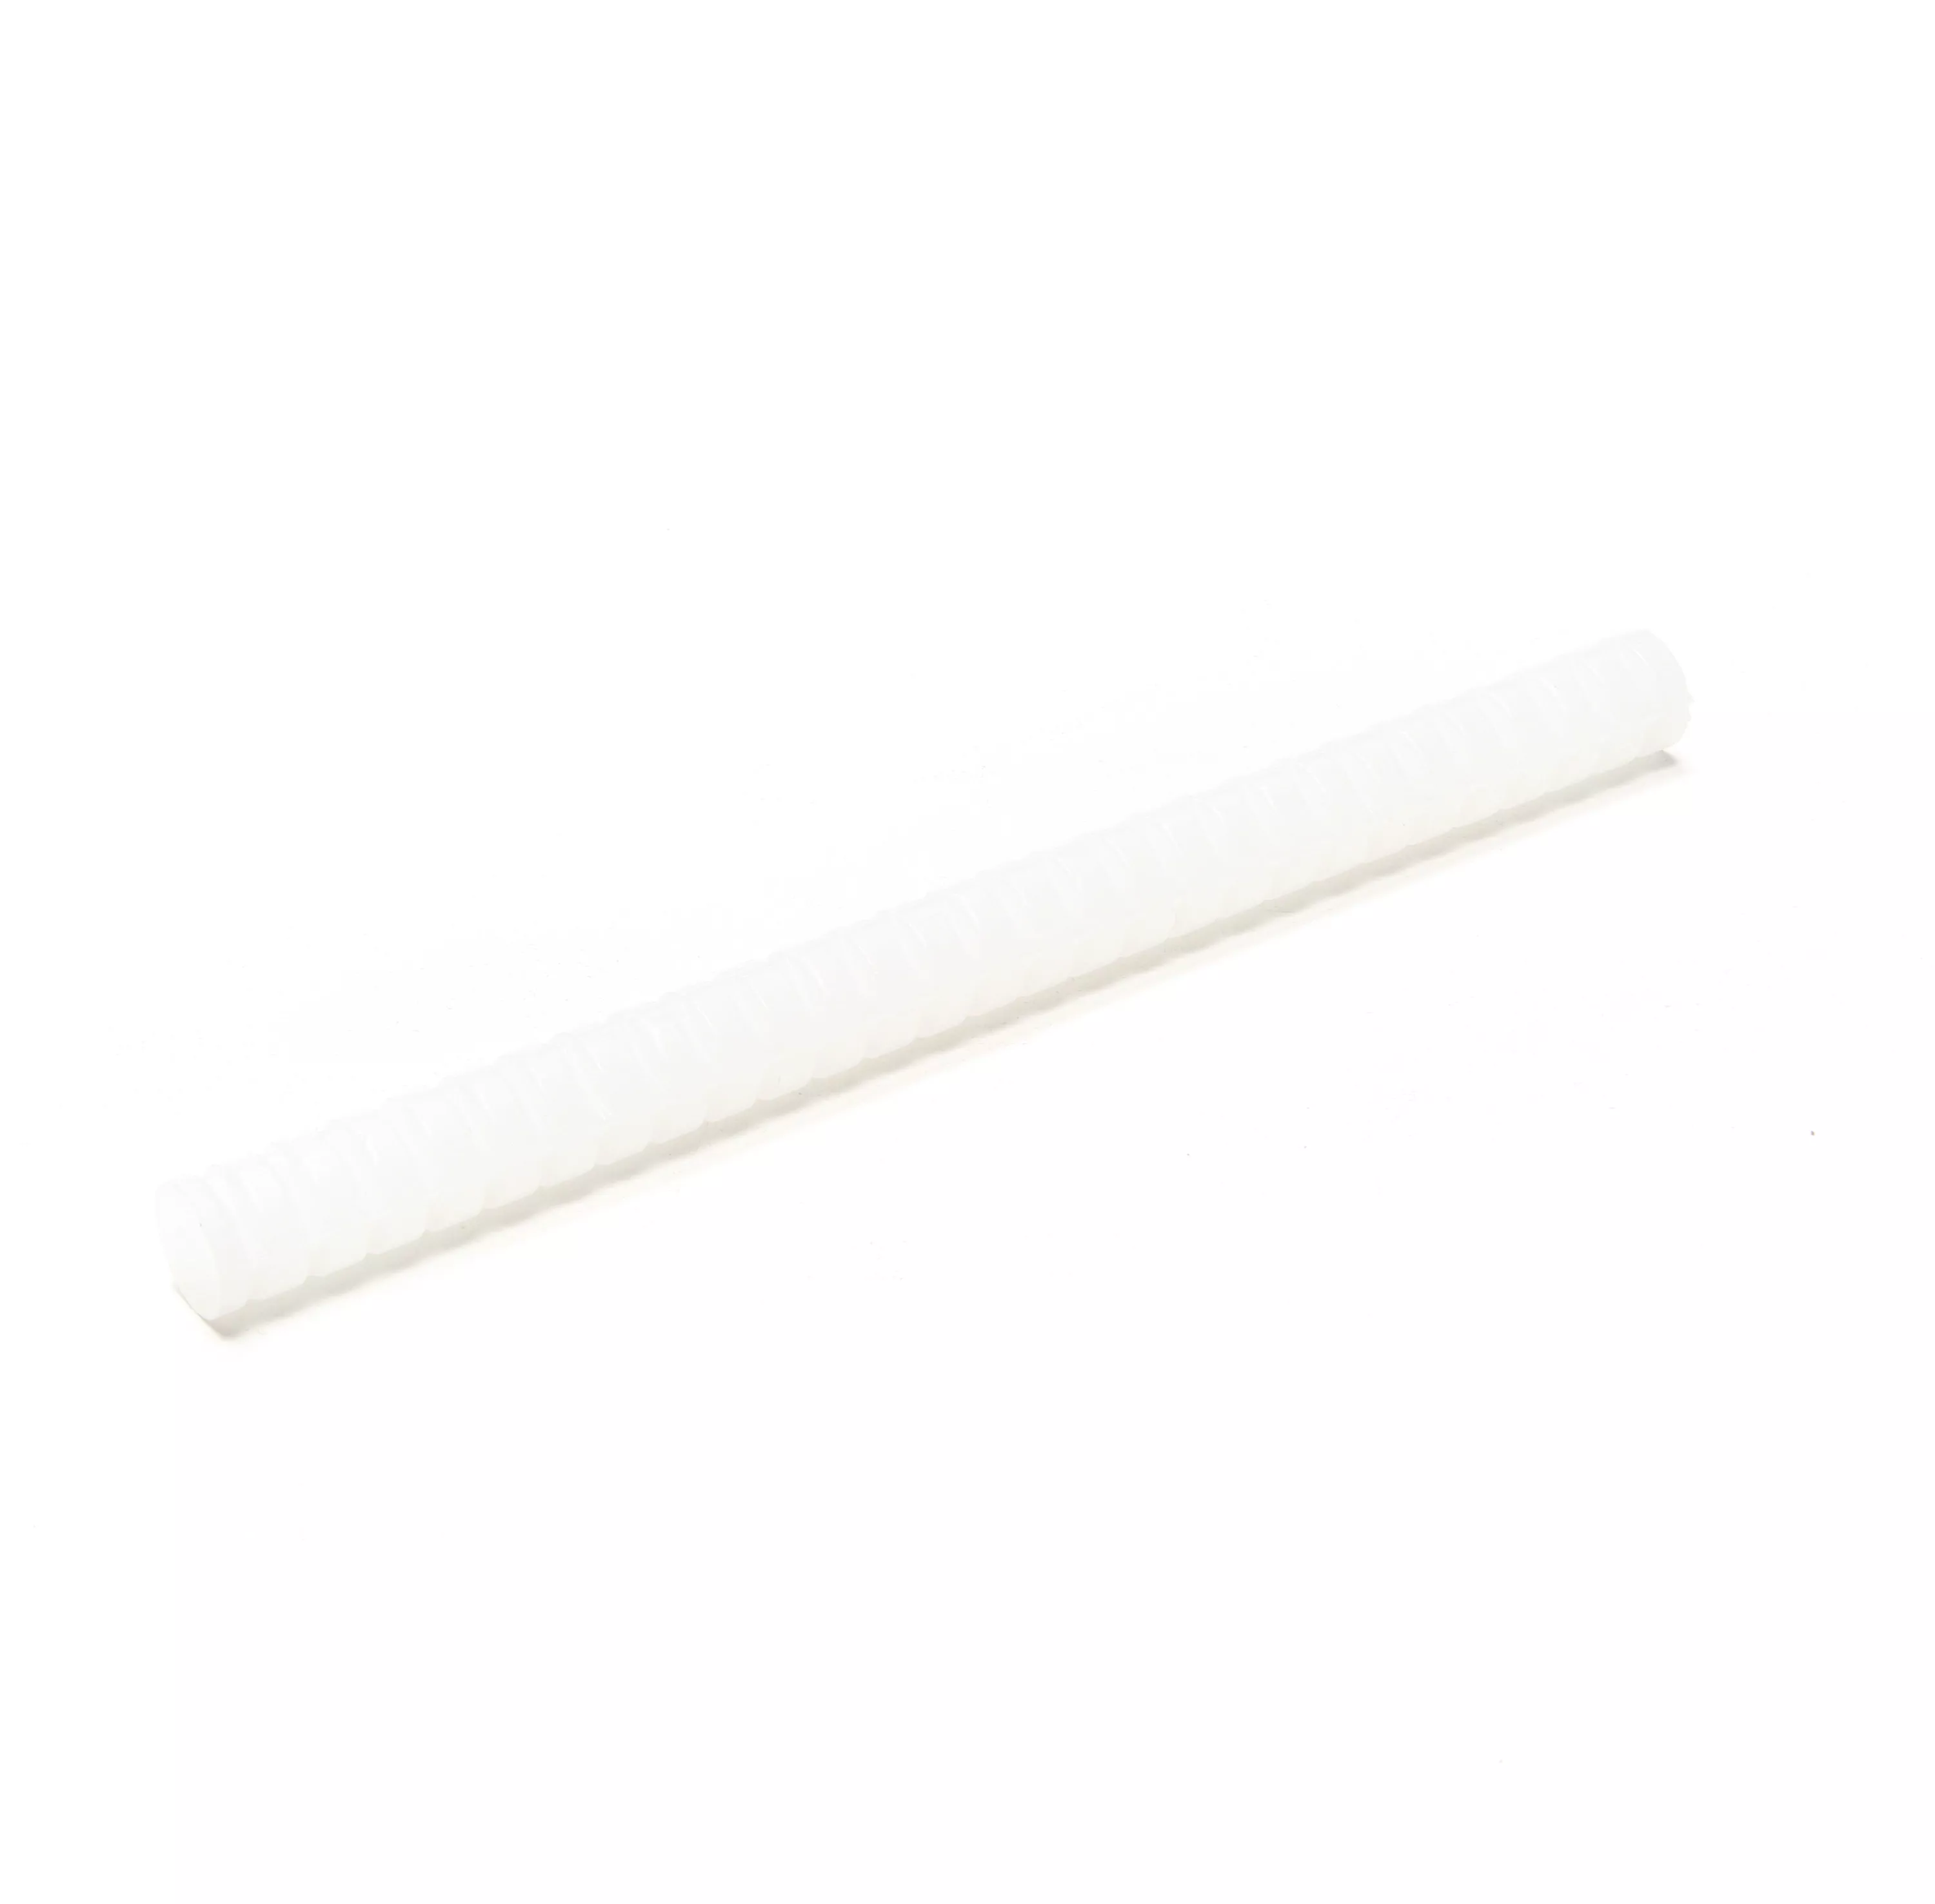 3M™ Hot Melt Adhesive 3764Q, Clear, 5/8 in x 8 Inch, 11 lb, Case